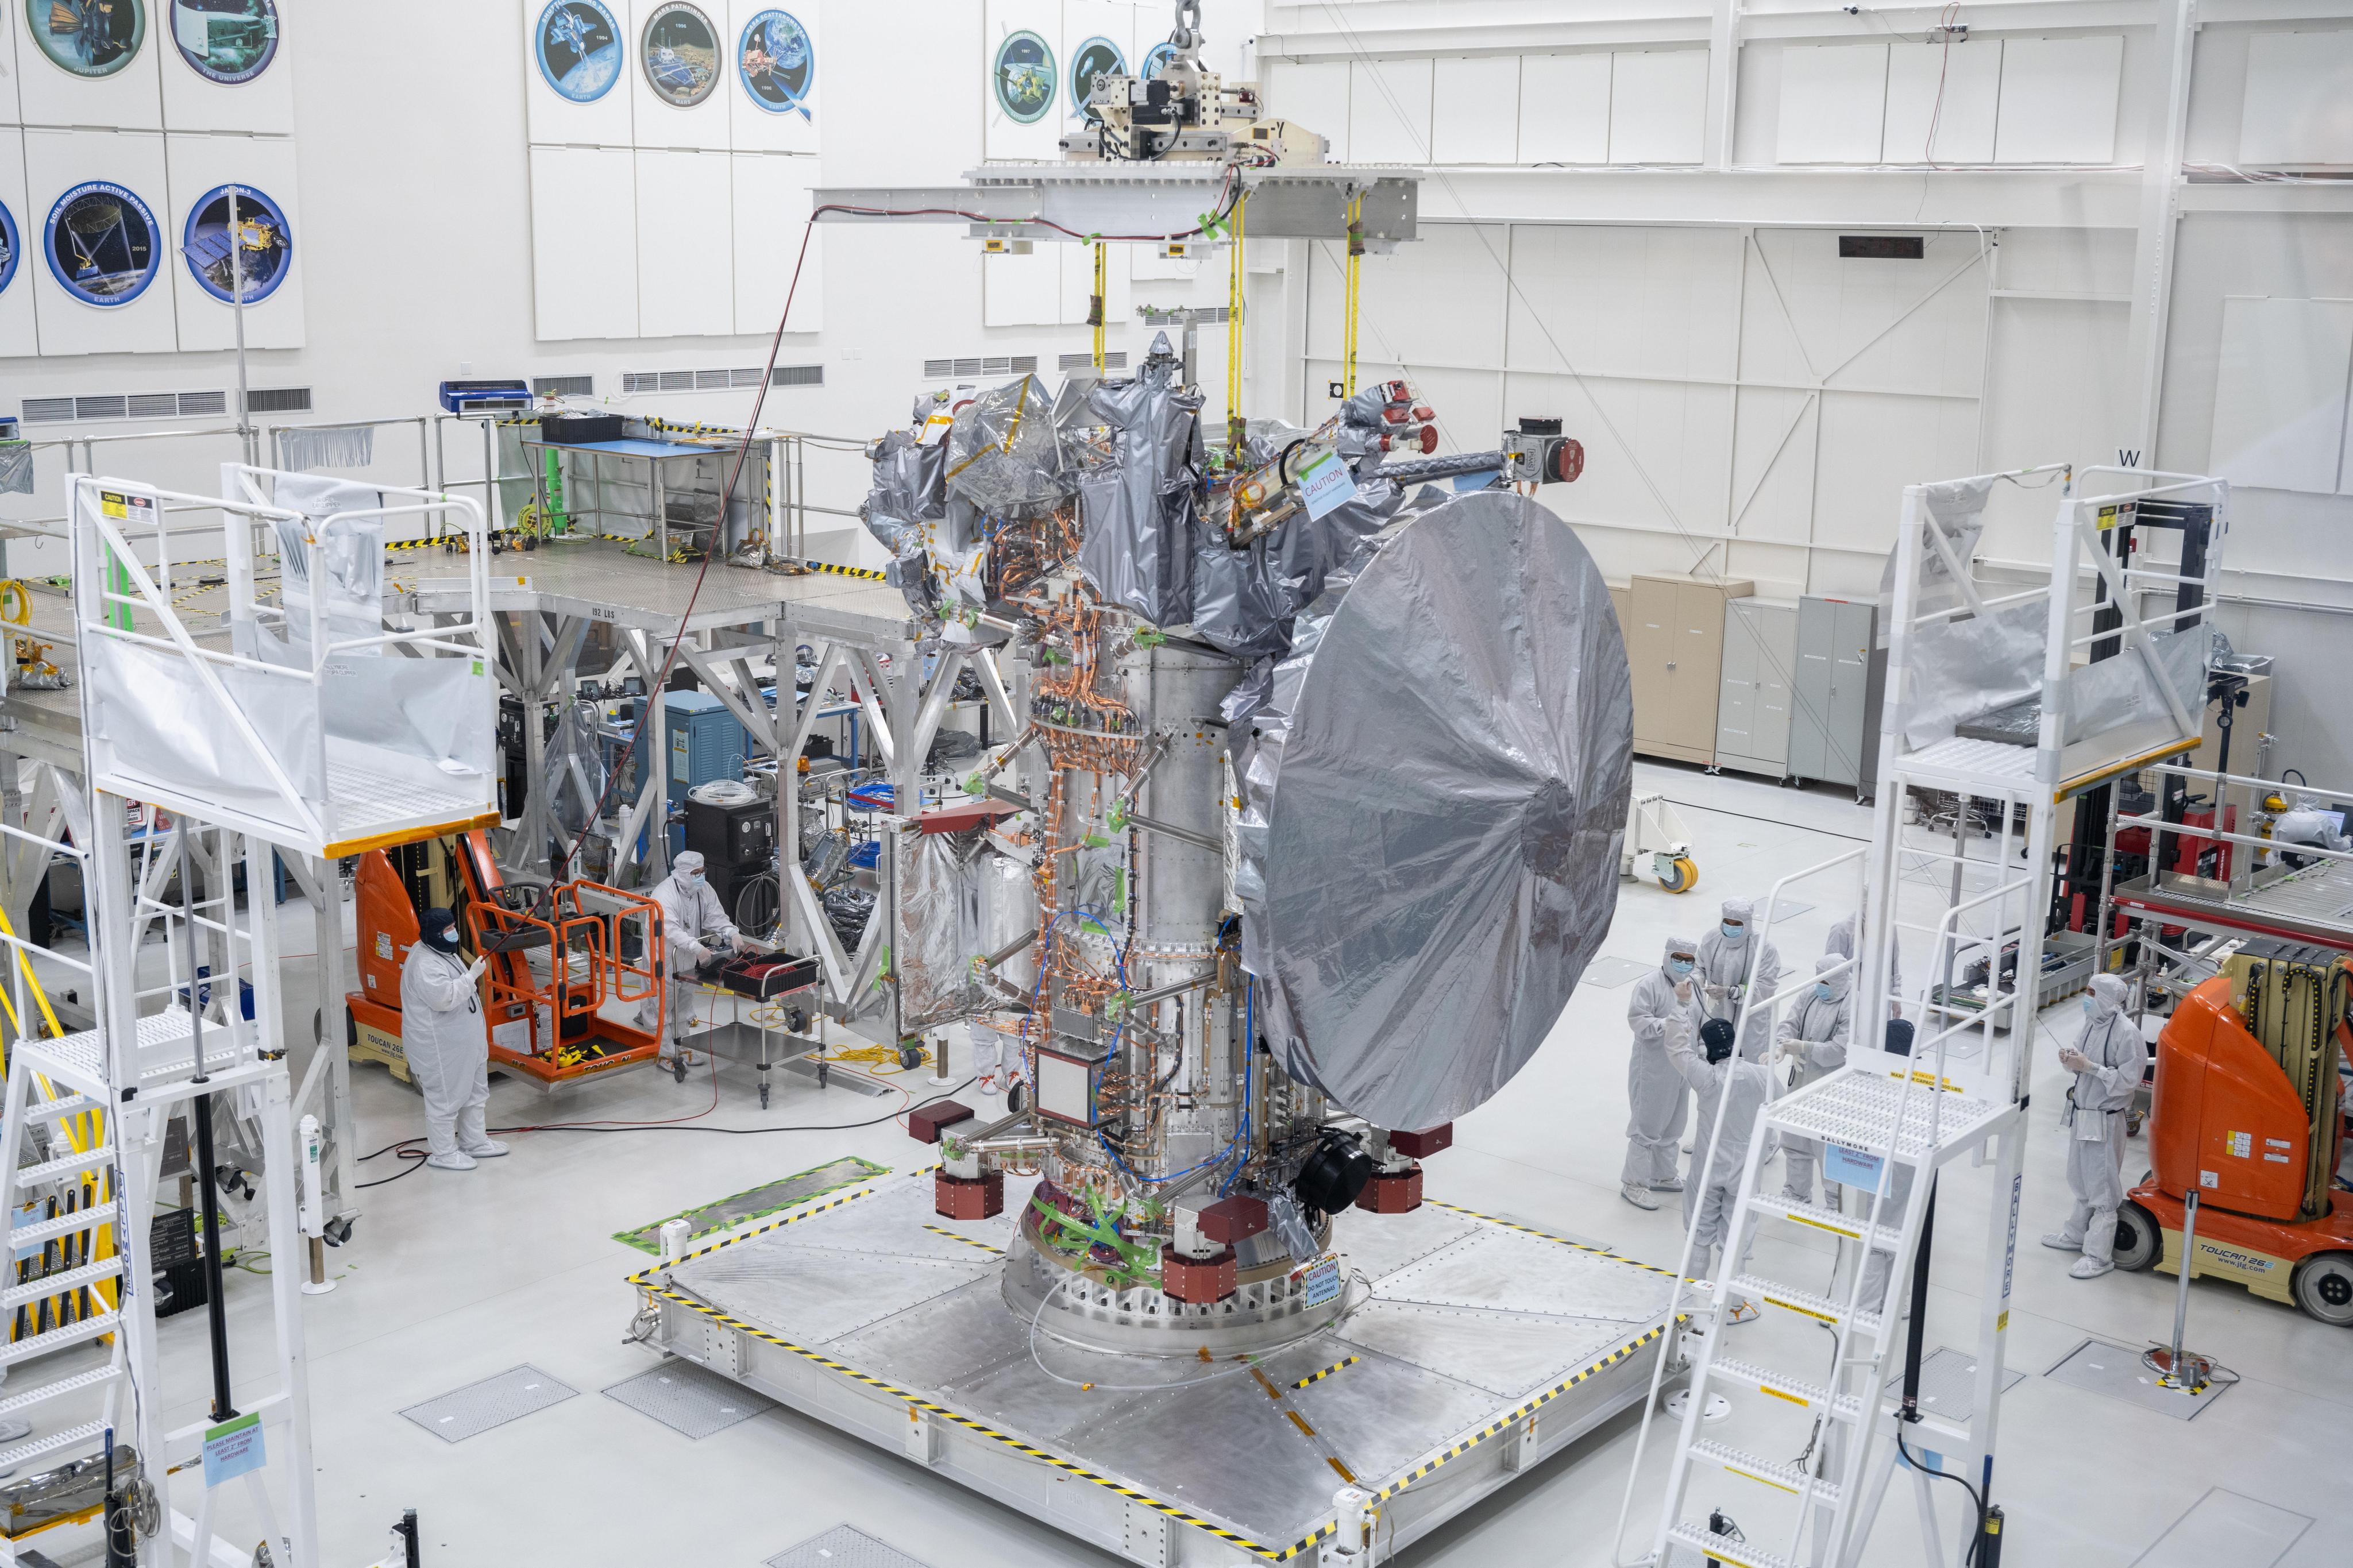 The silver-colored Europa Clipper sits on a work stand in a clean room. Workers in protective clothing stand nearby.